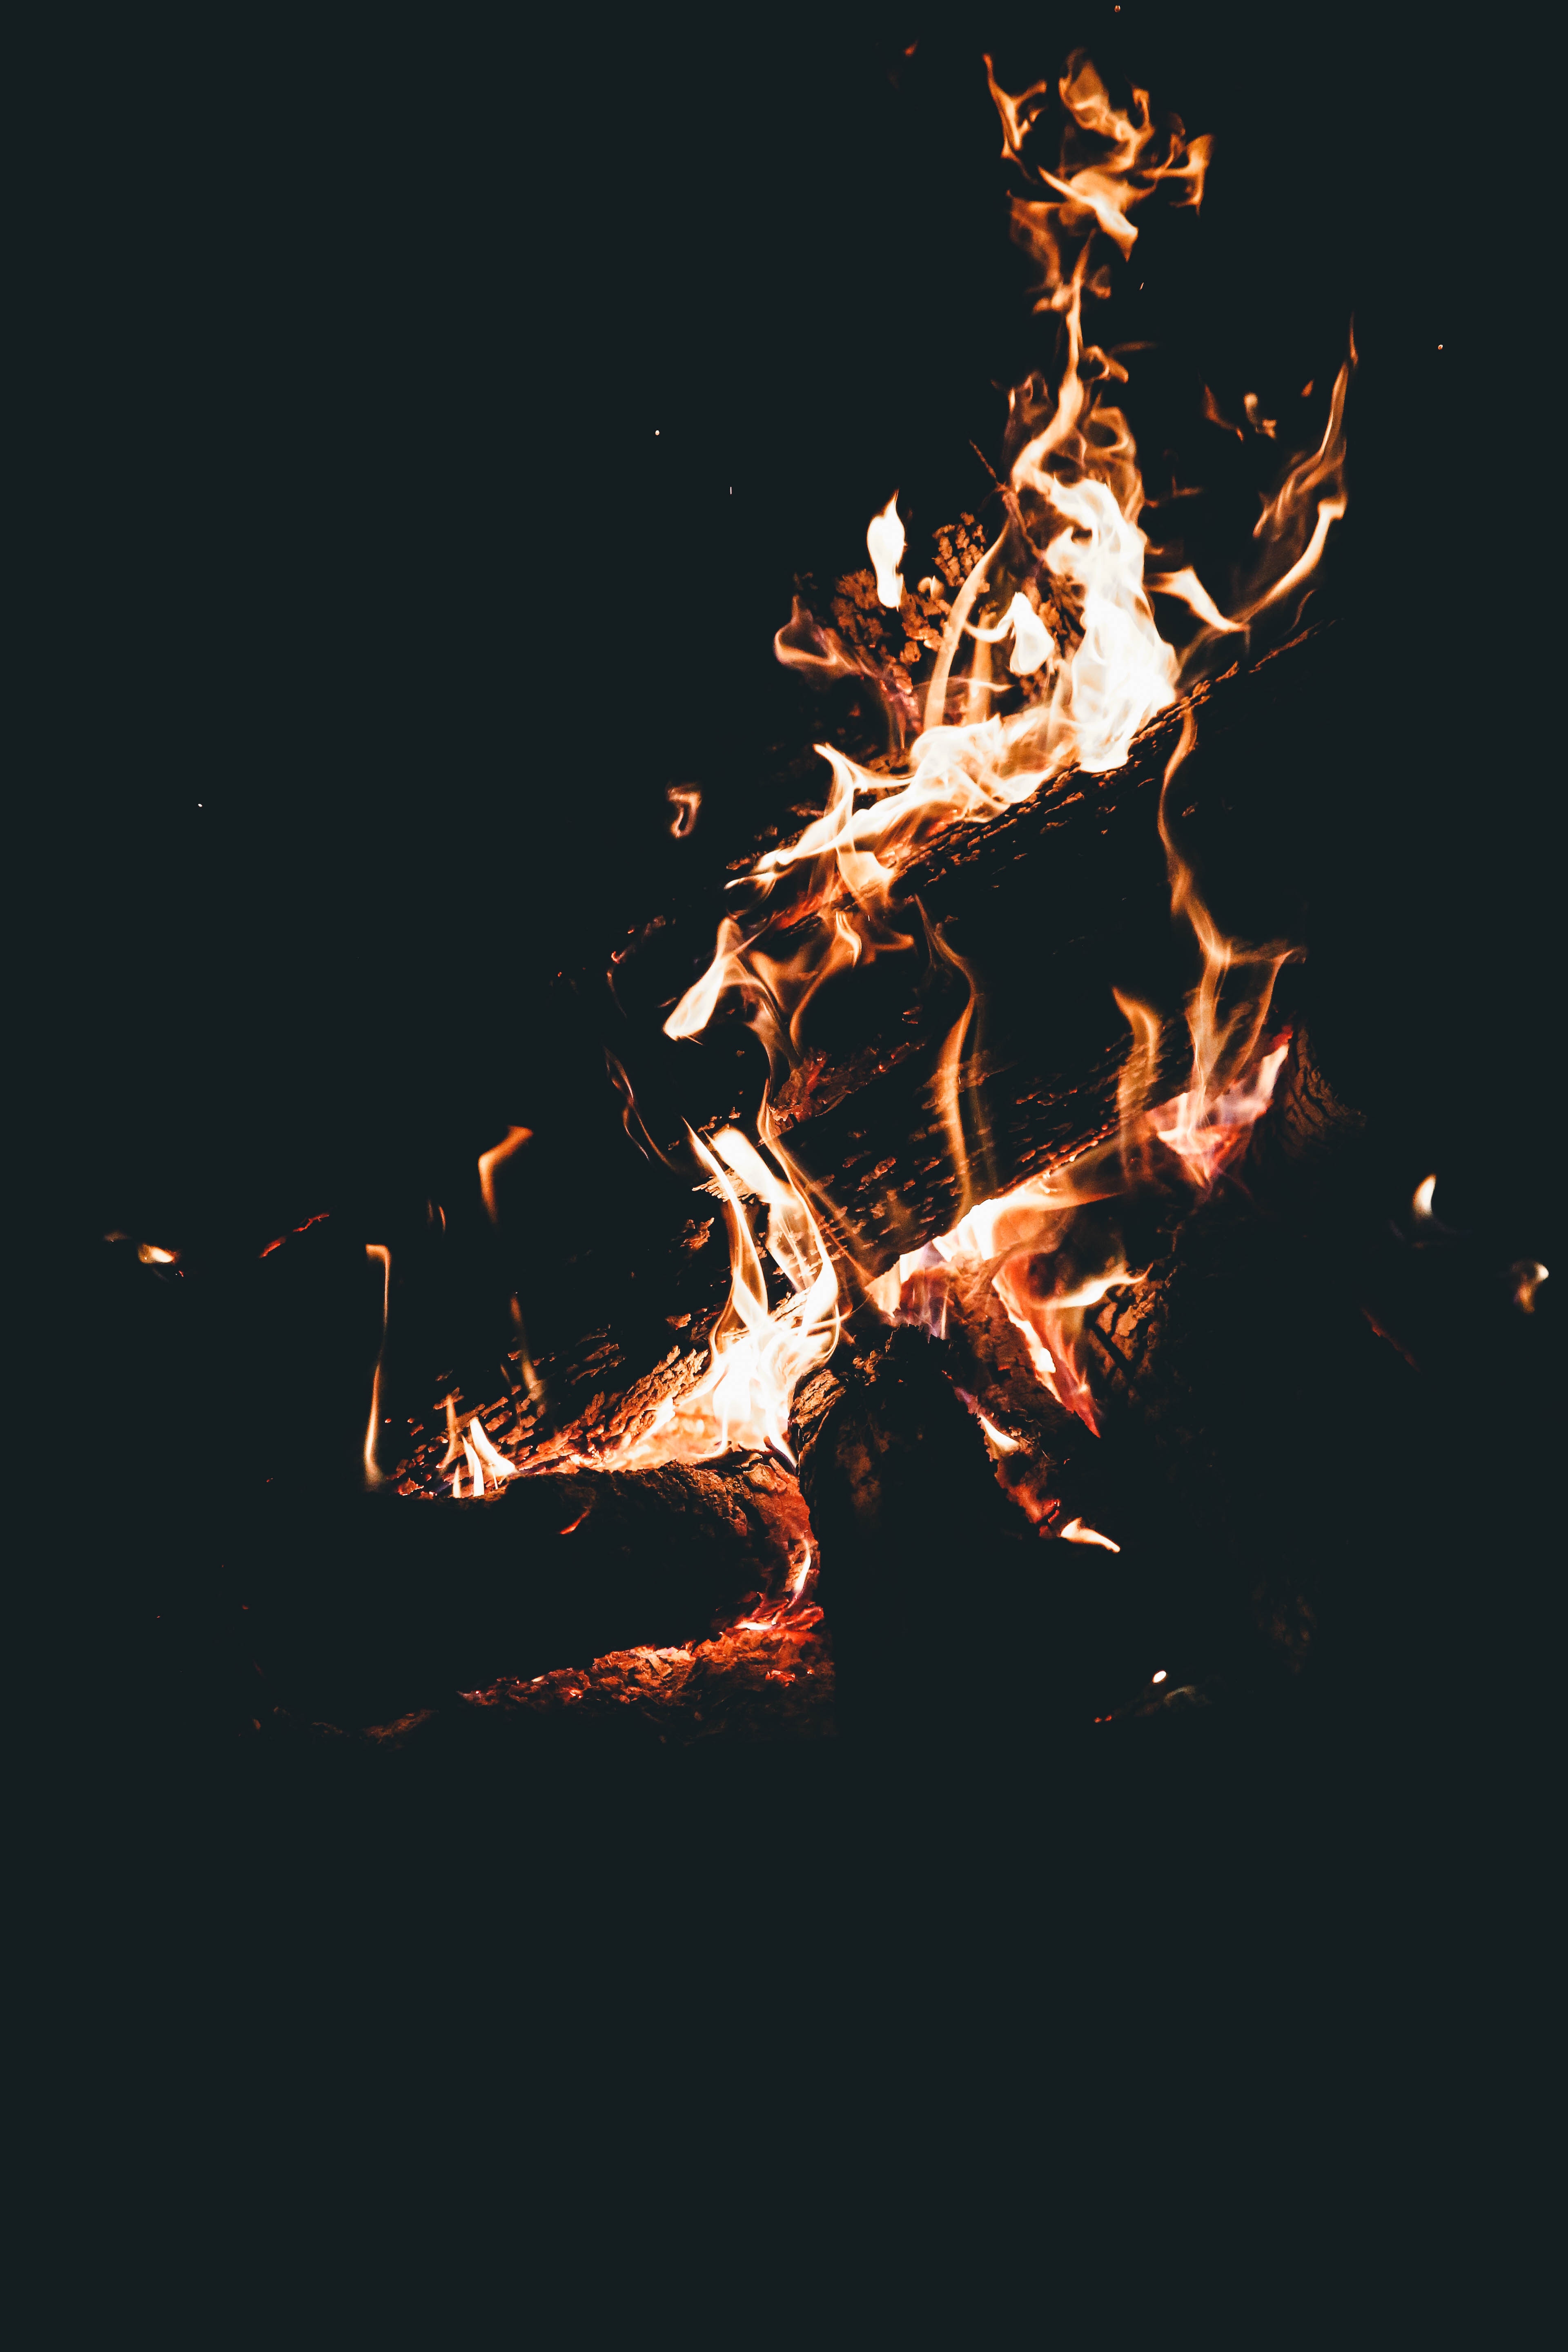 flame, bonfire, dark, fire, firewood, camping, campsite, combustion